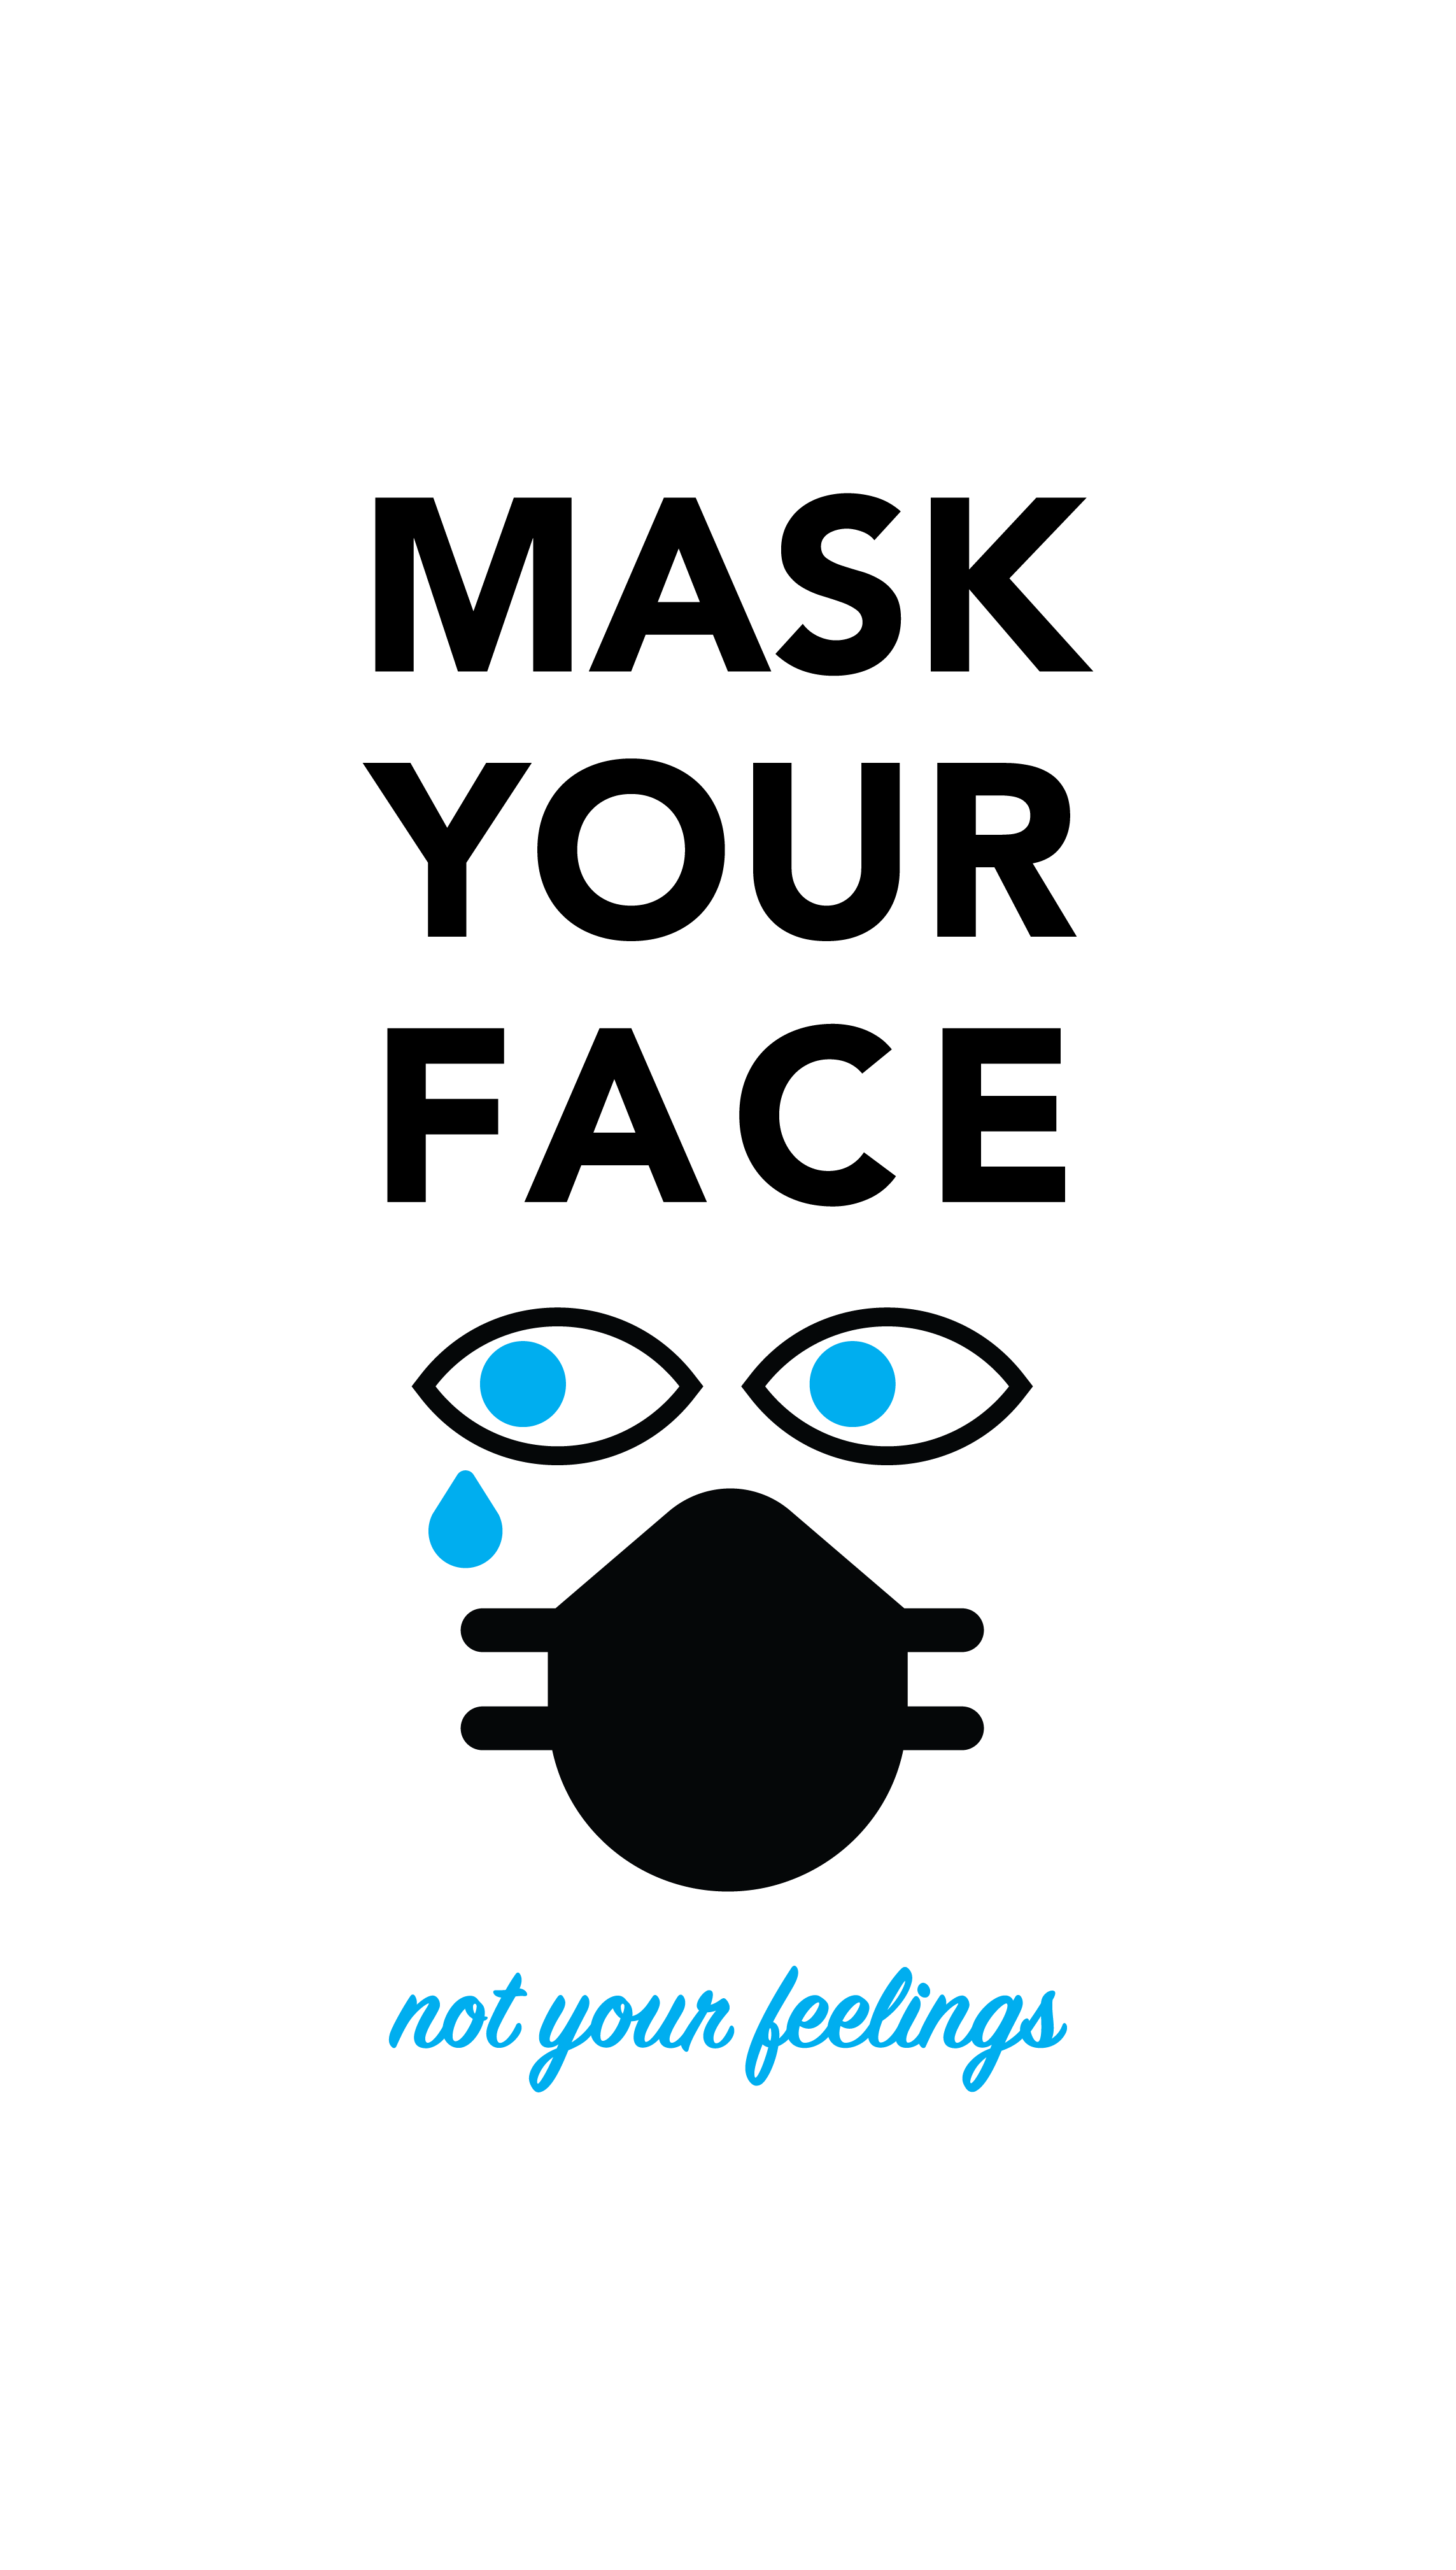 Mask your face not your feelings